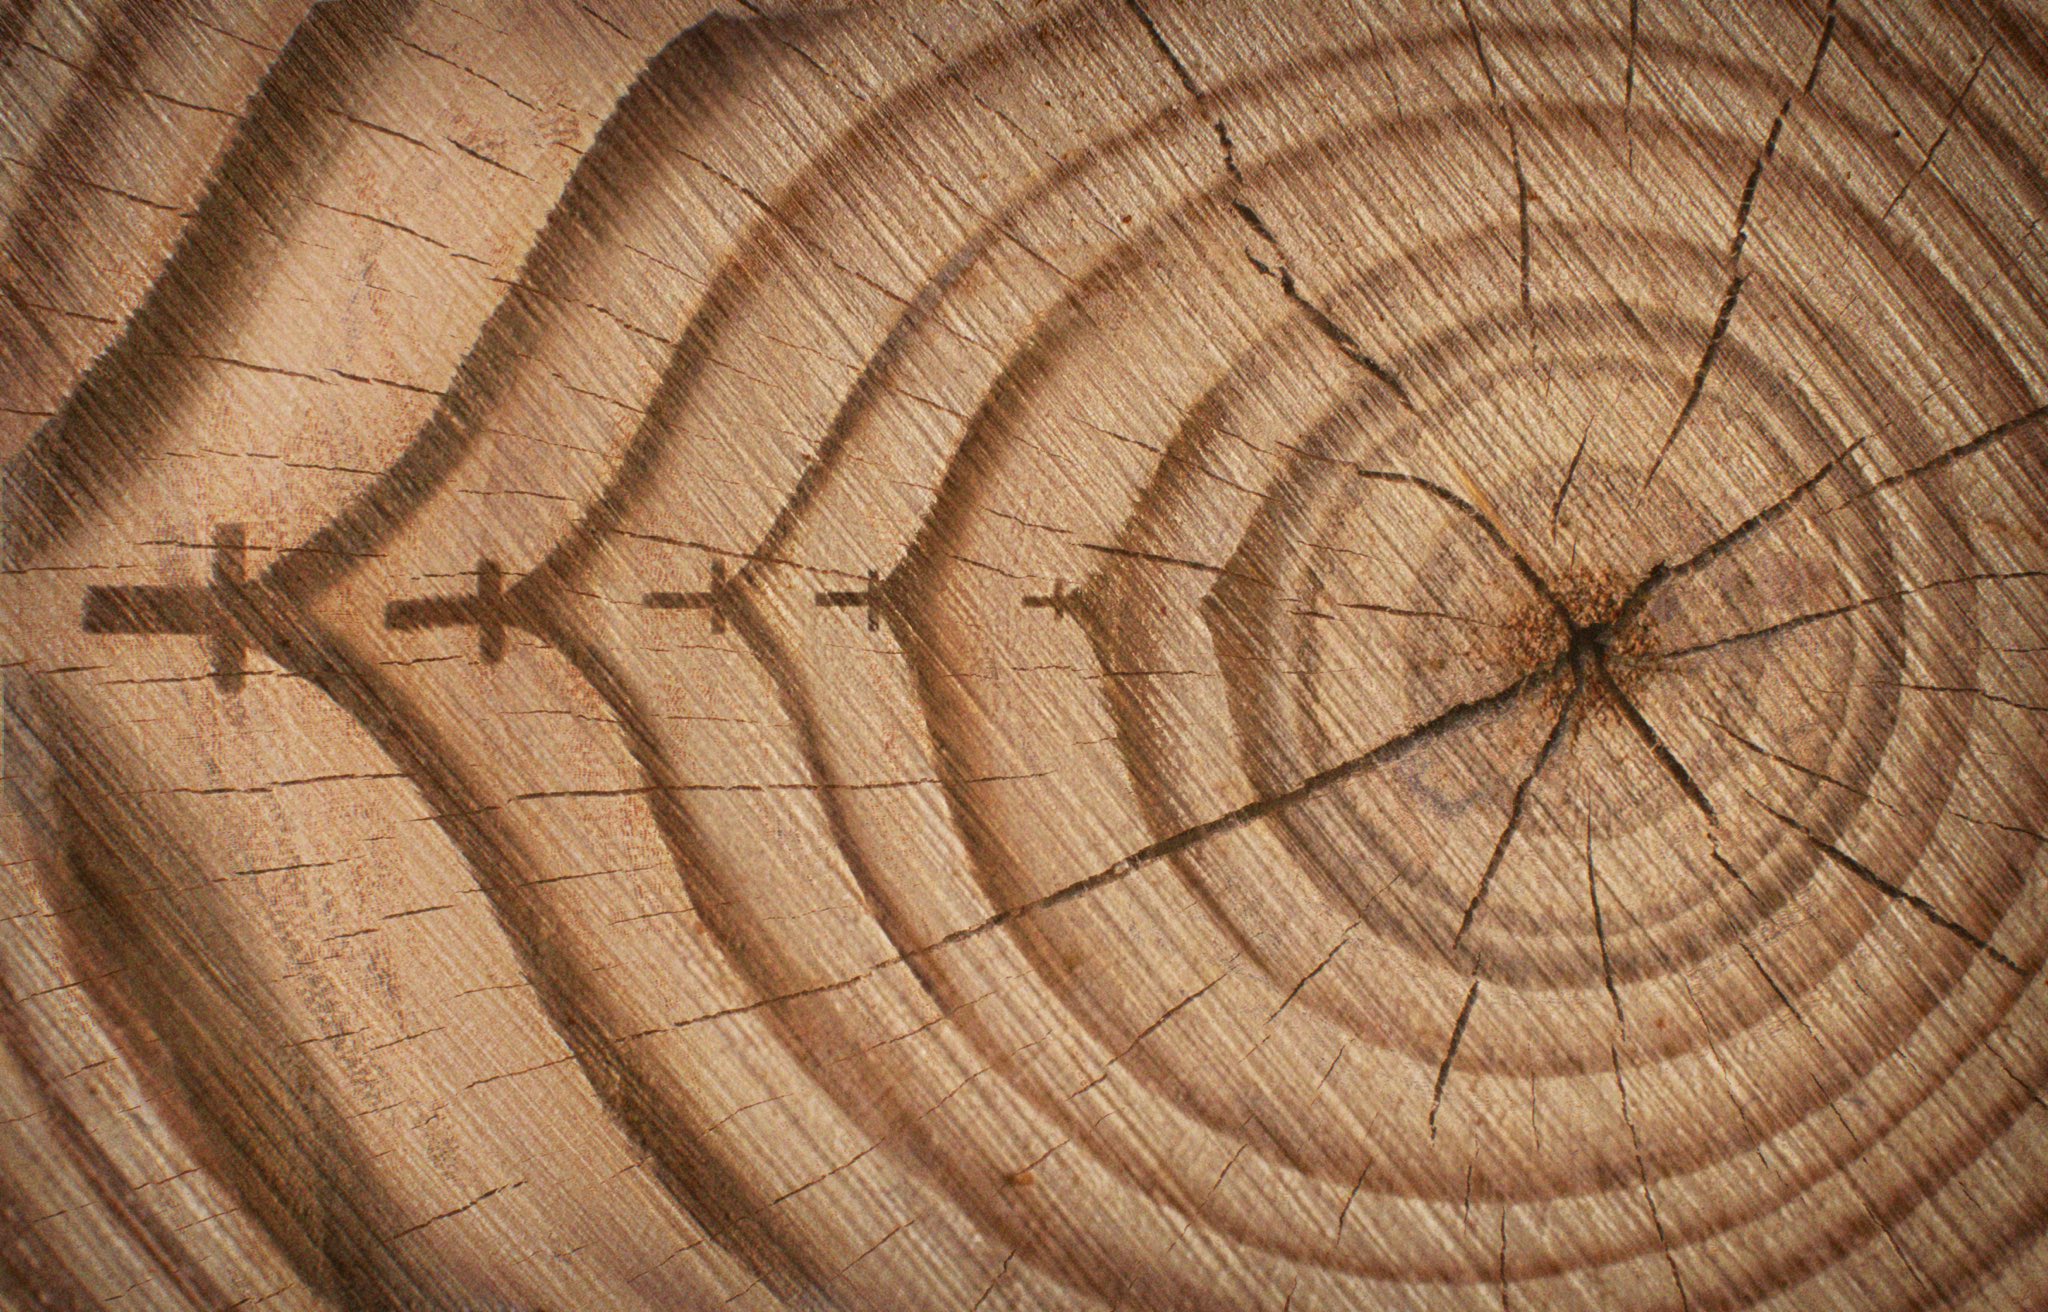 Climate CSI: How counting tree rings can unlock environmental mysteries -  BBC Science Focus Magazine